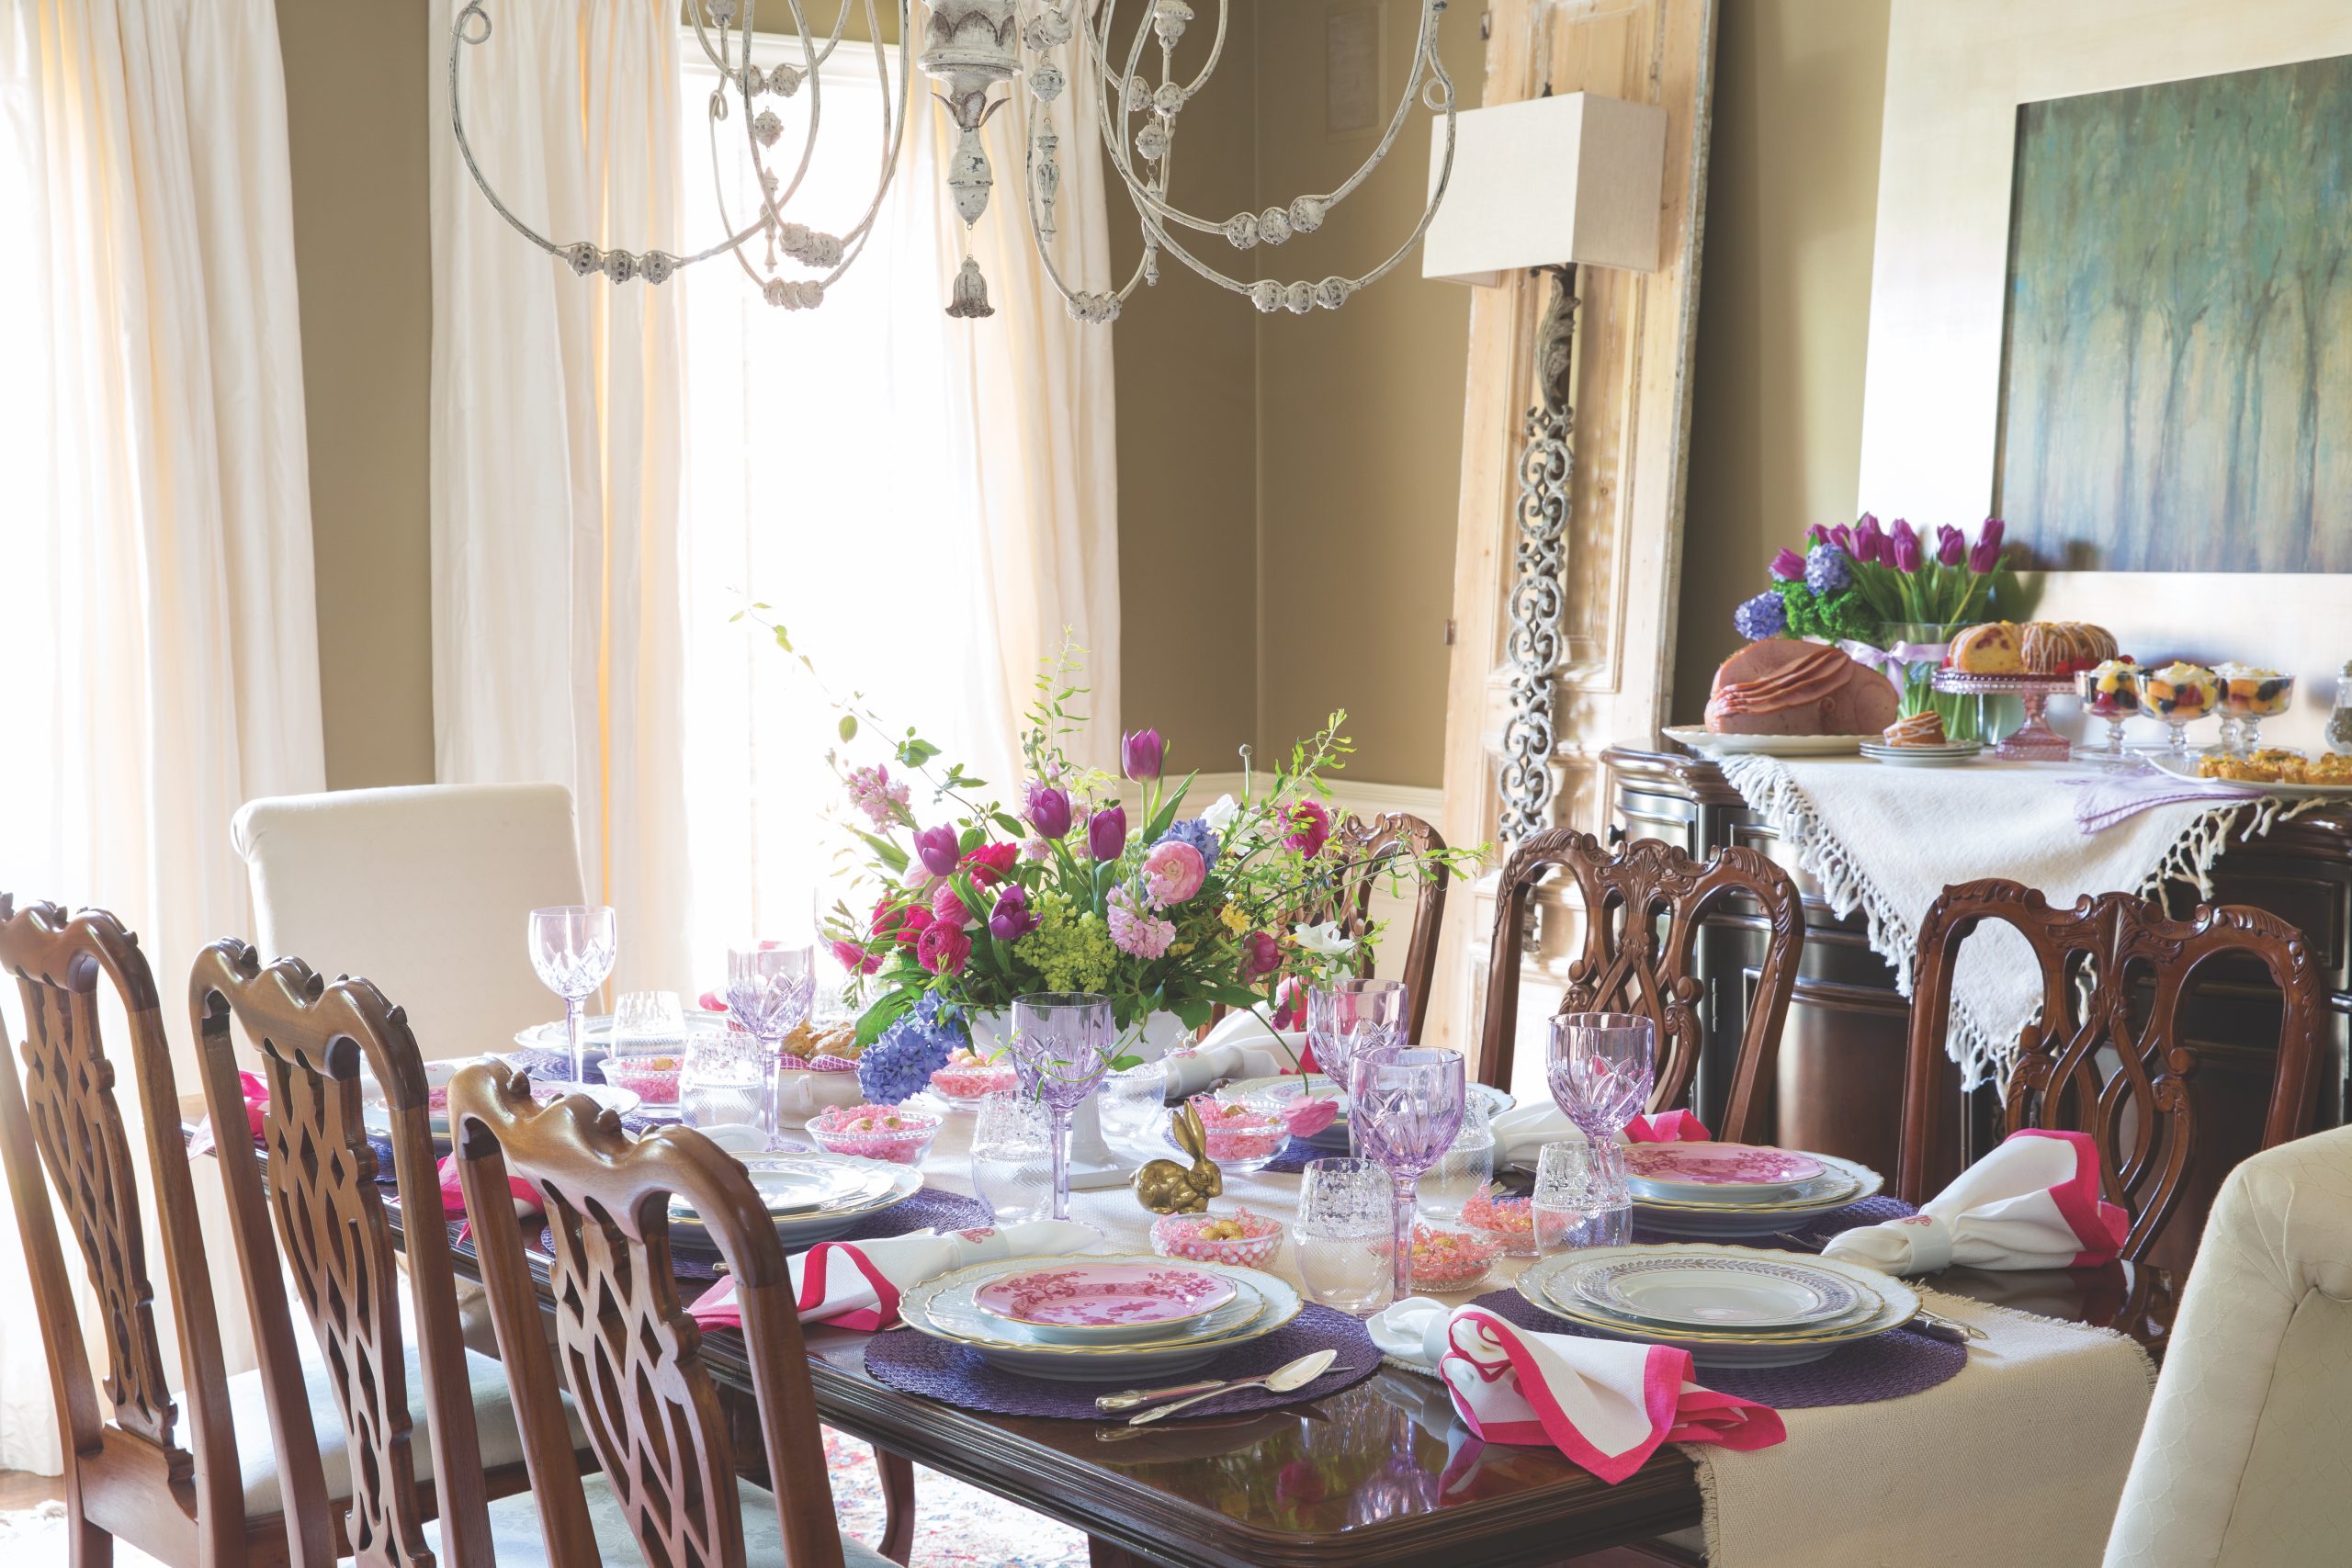 5 Magnificent Easter Settings to Inspire Your Holiday Tablescape